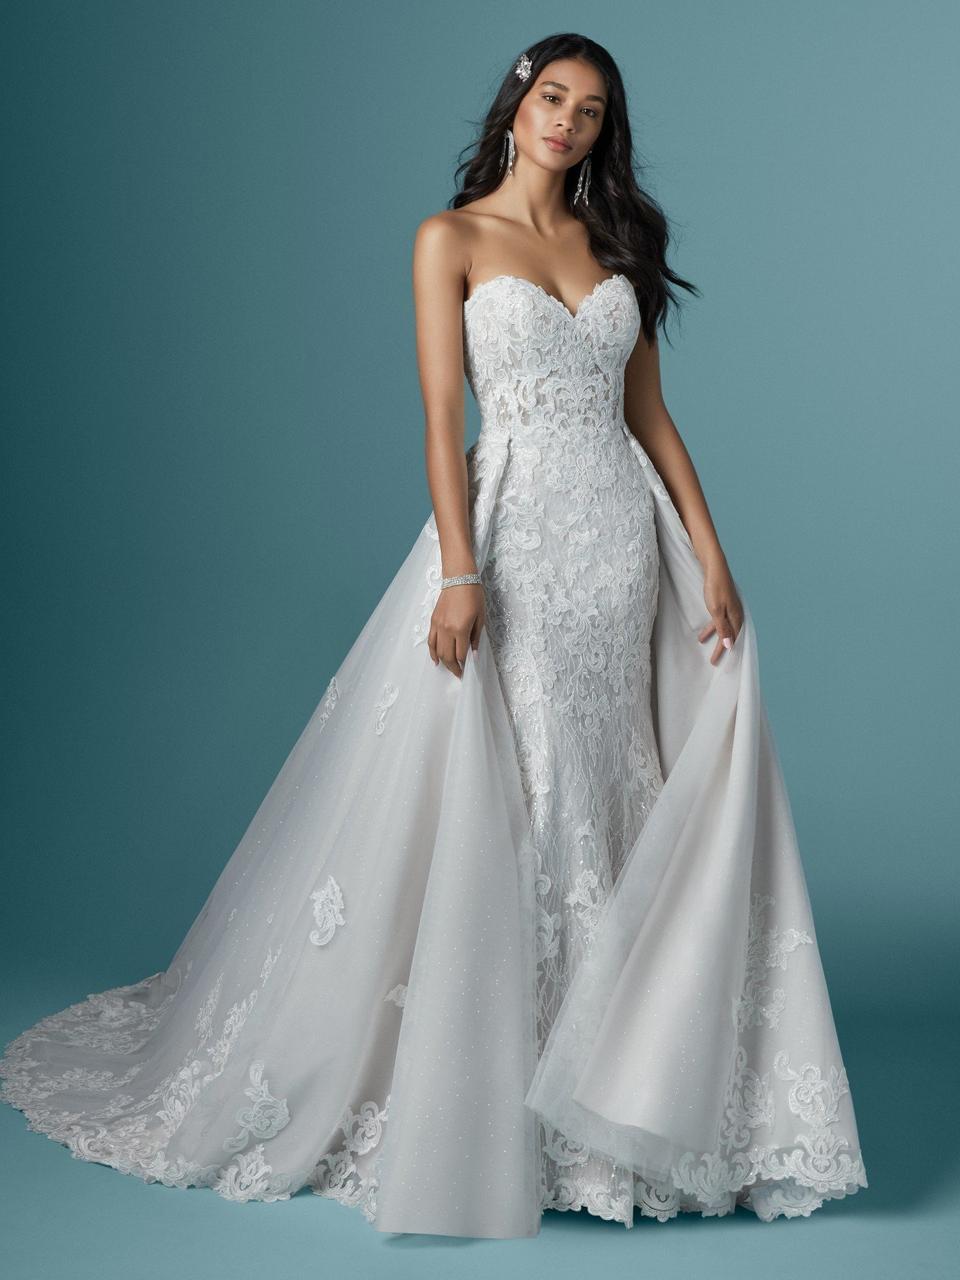 Wedding Dress Prices: UK Wedding Dress Price Guide - hitched.co.uk ...